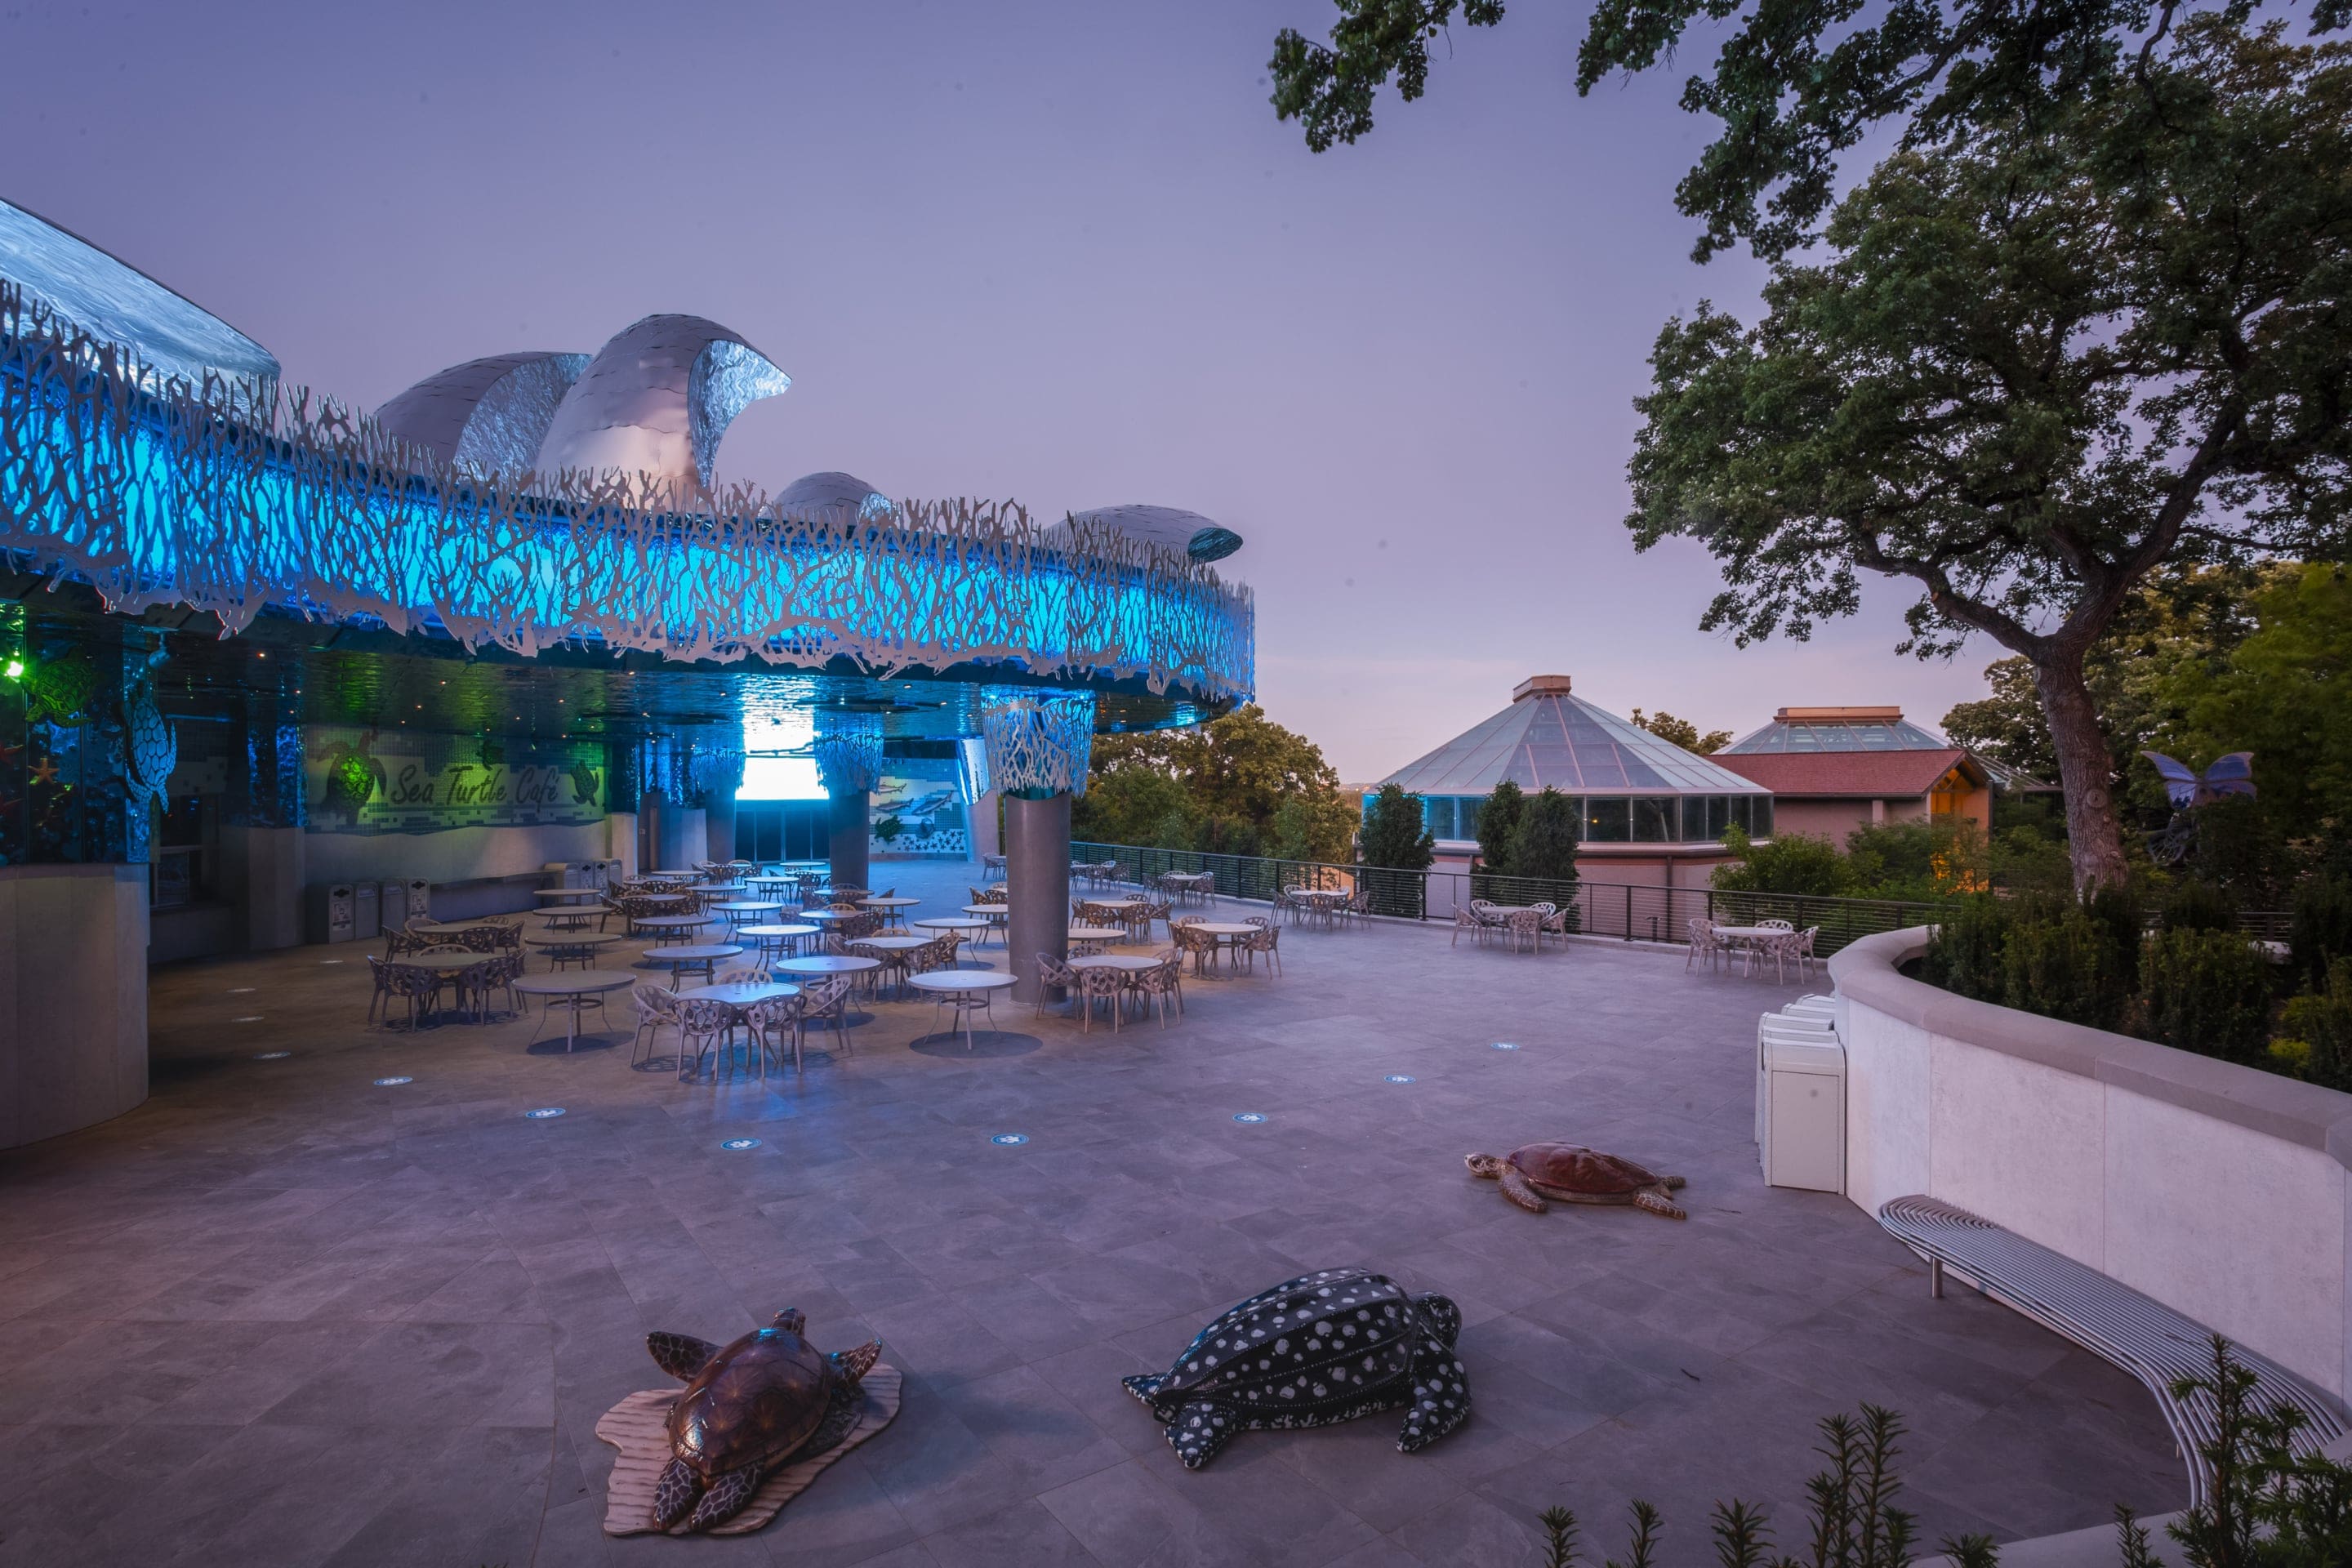 View of the Sea Turtle Cafe outdoor space at sunset with lighting.